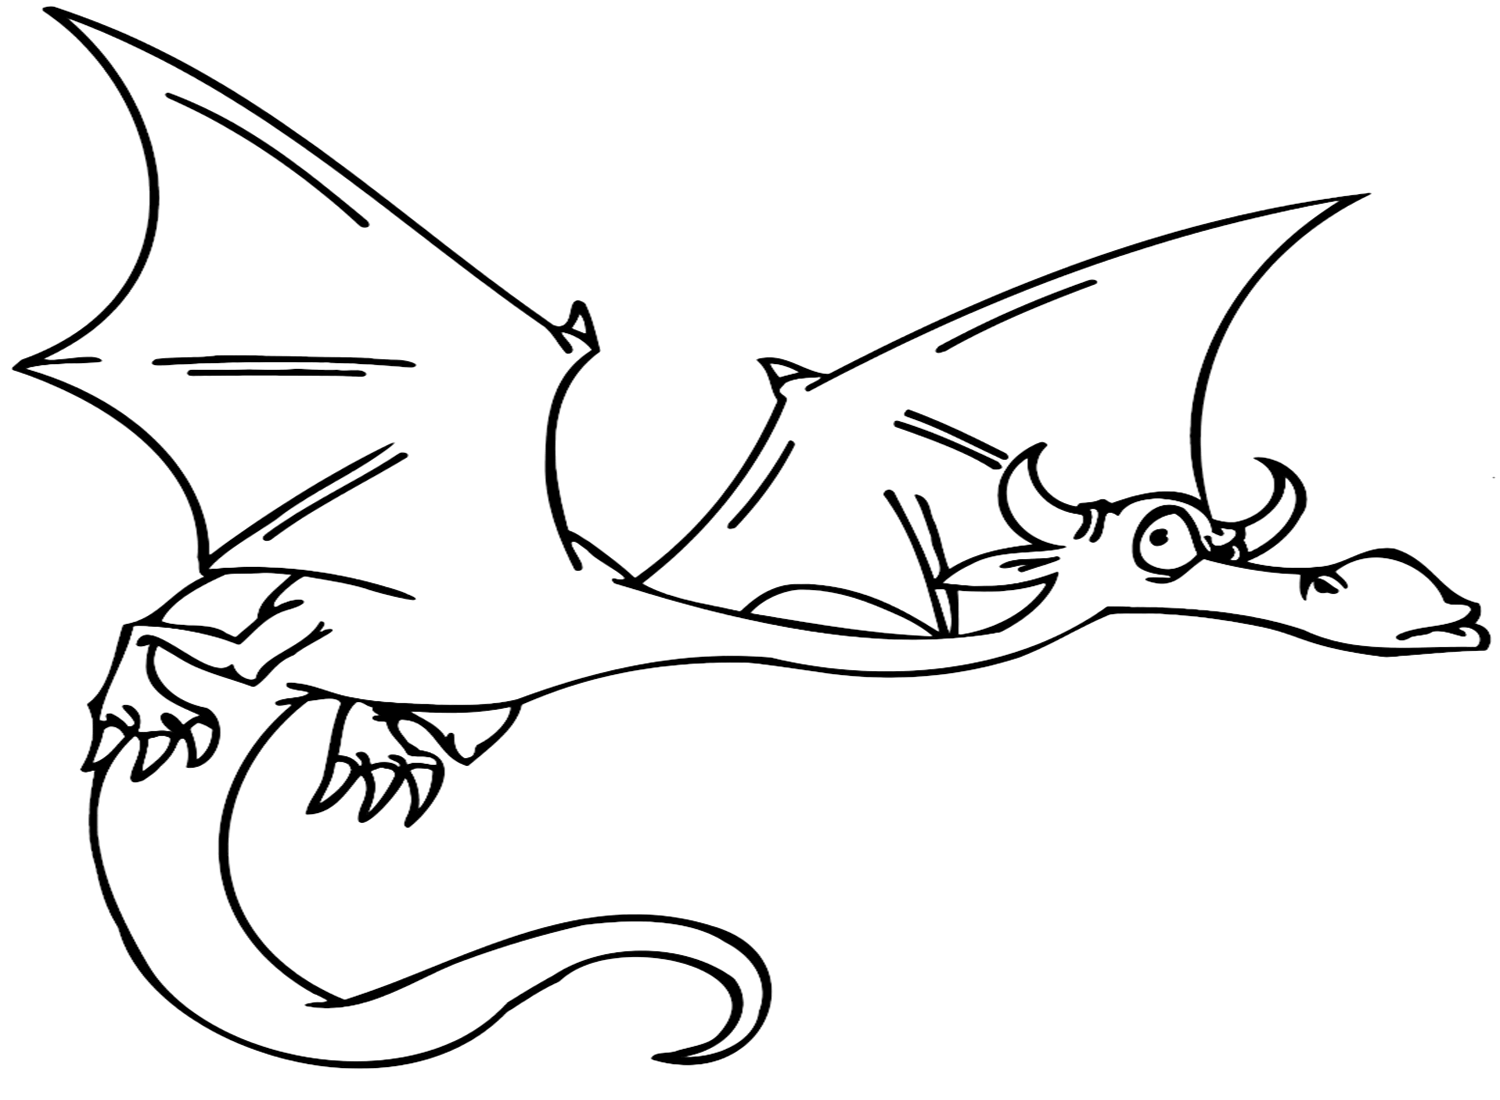 Suspicious Flying Dragon Coloring Pages